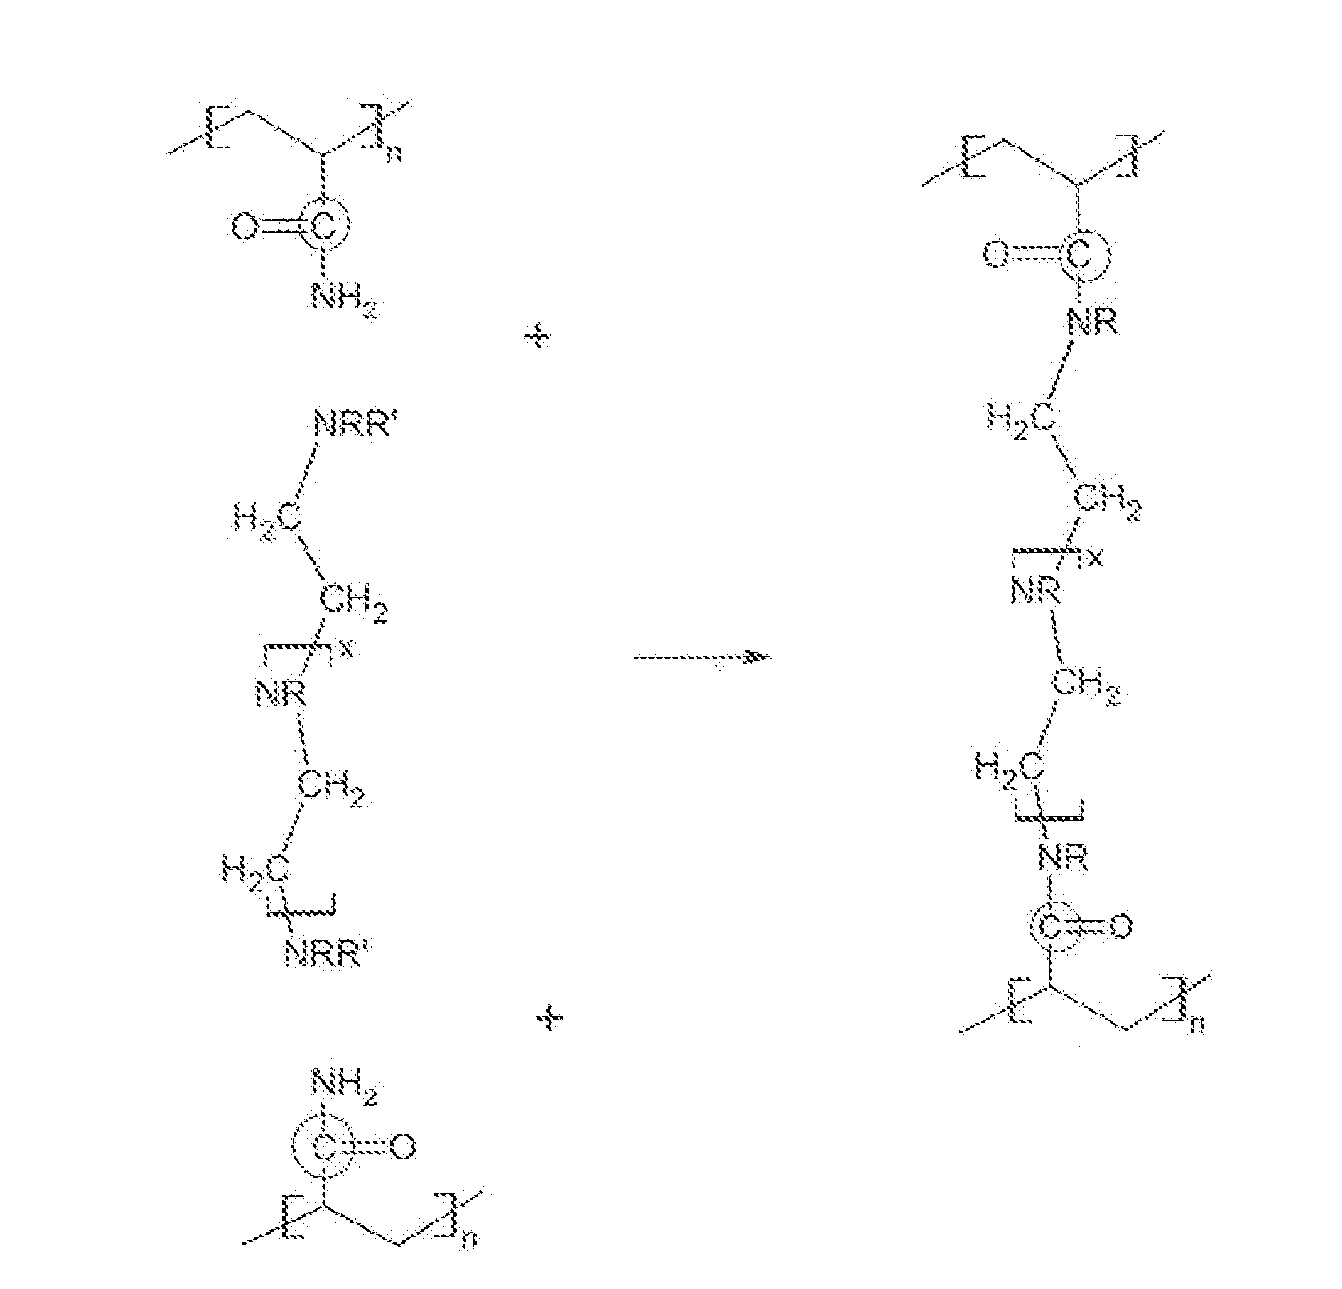 Crosslinking of swellable polymer with pei